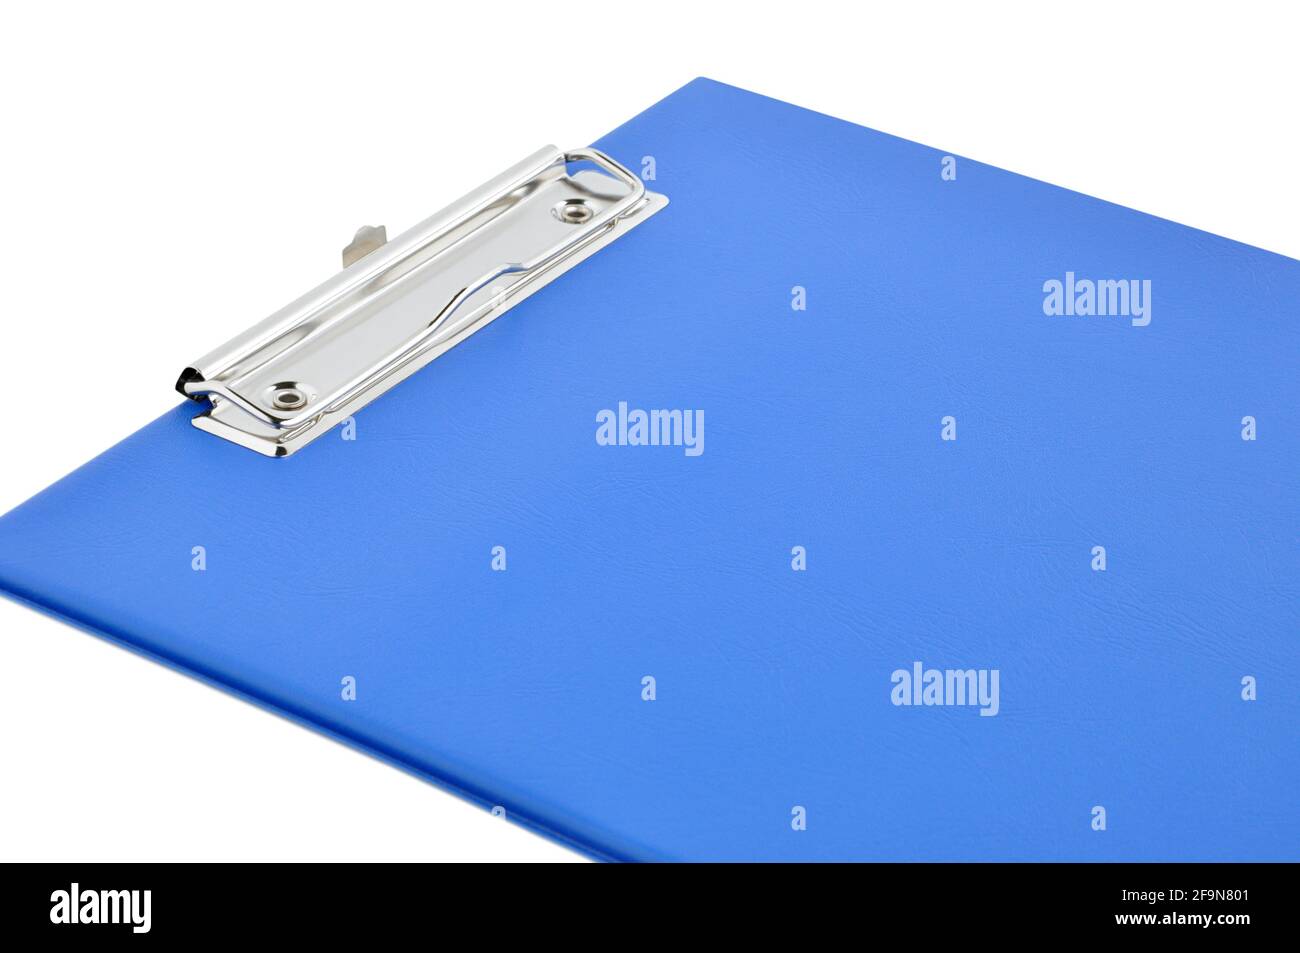 Clipboard - blue plastic clipboard or writing board isolated on white background Stock Photo